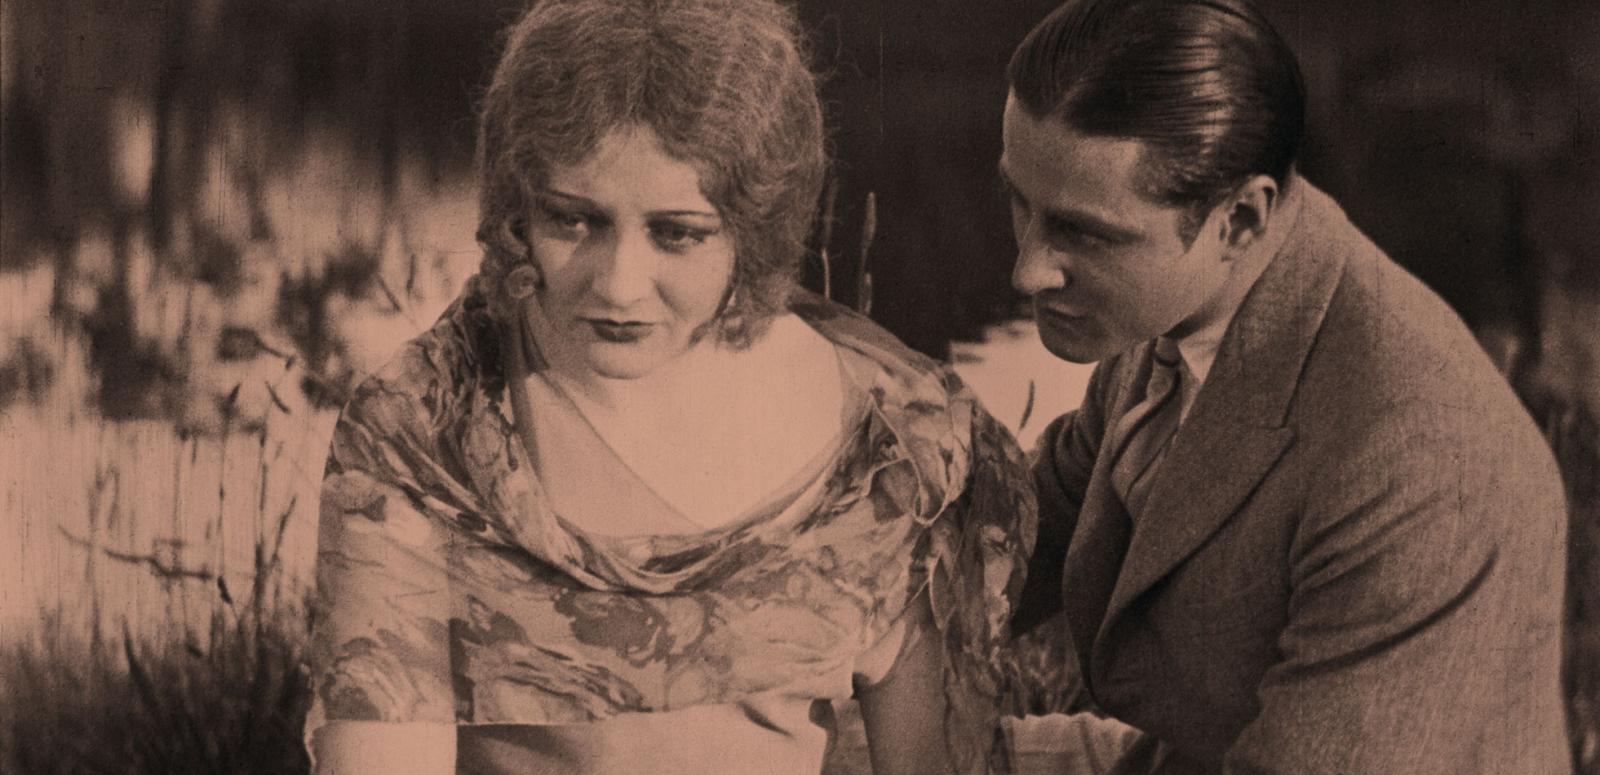 Josef Bambach tried to console Isabel McDonagh in a scene from the 1929 silent movie The Cheaters